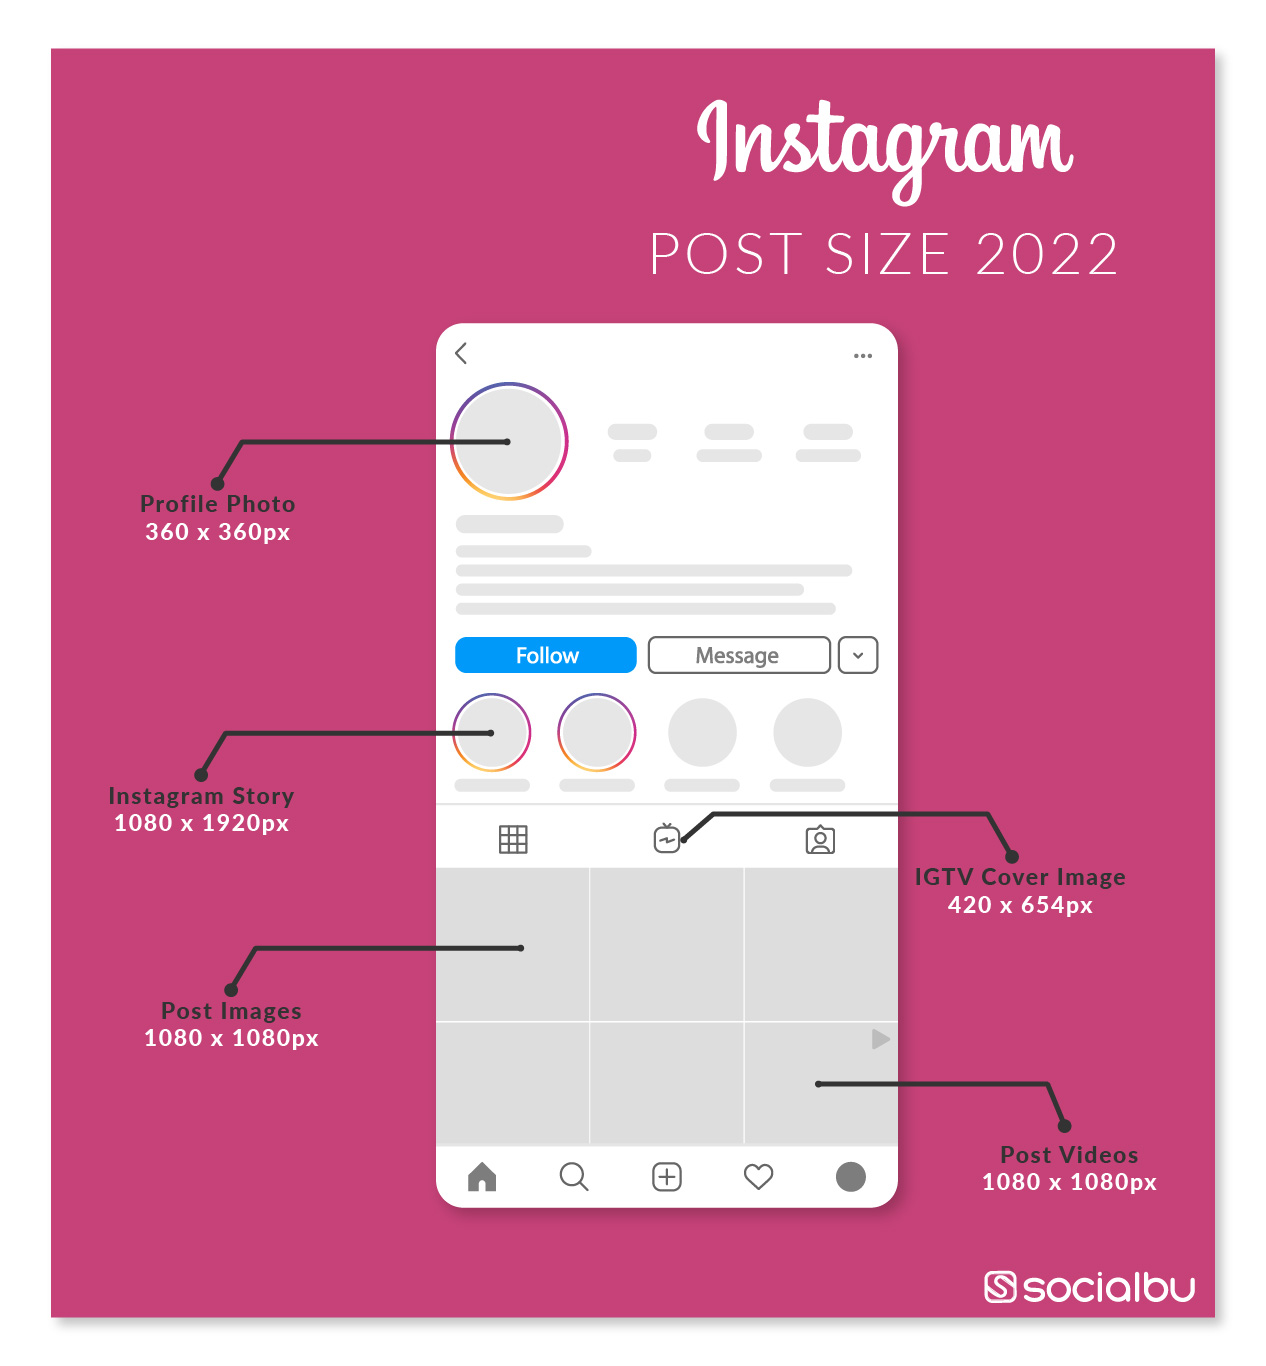 Instagram Posts and Story Dimensions